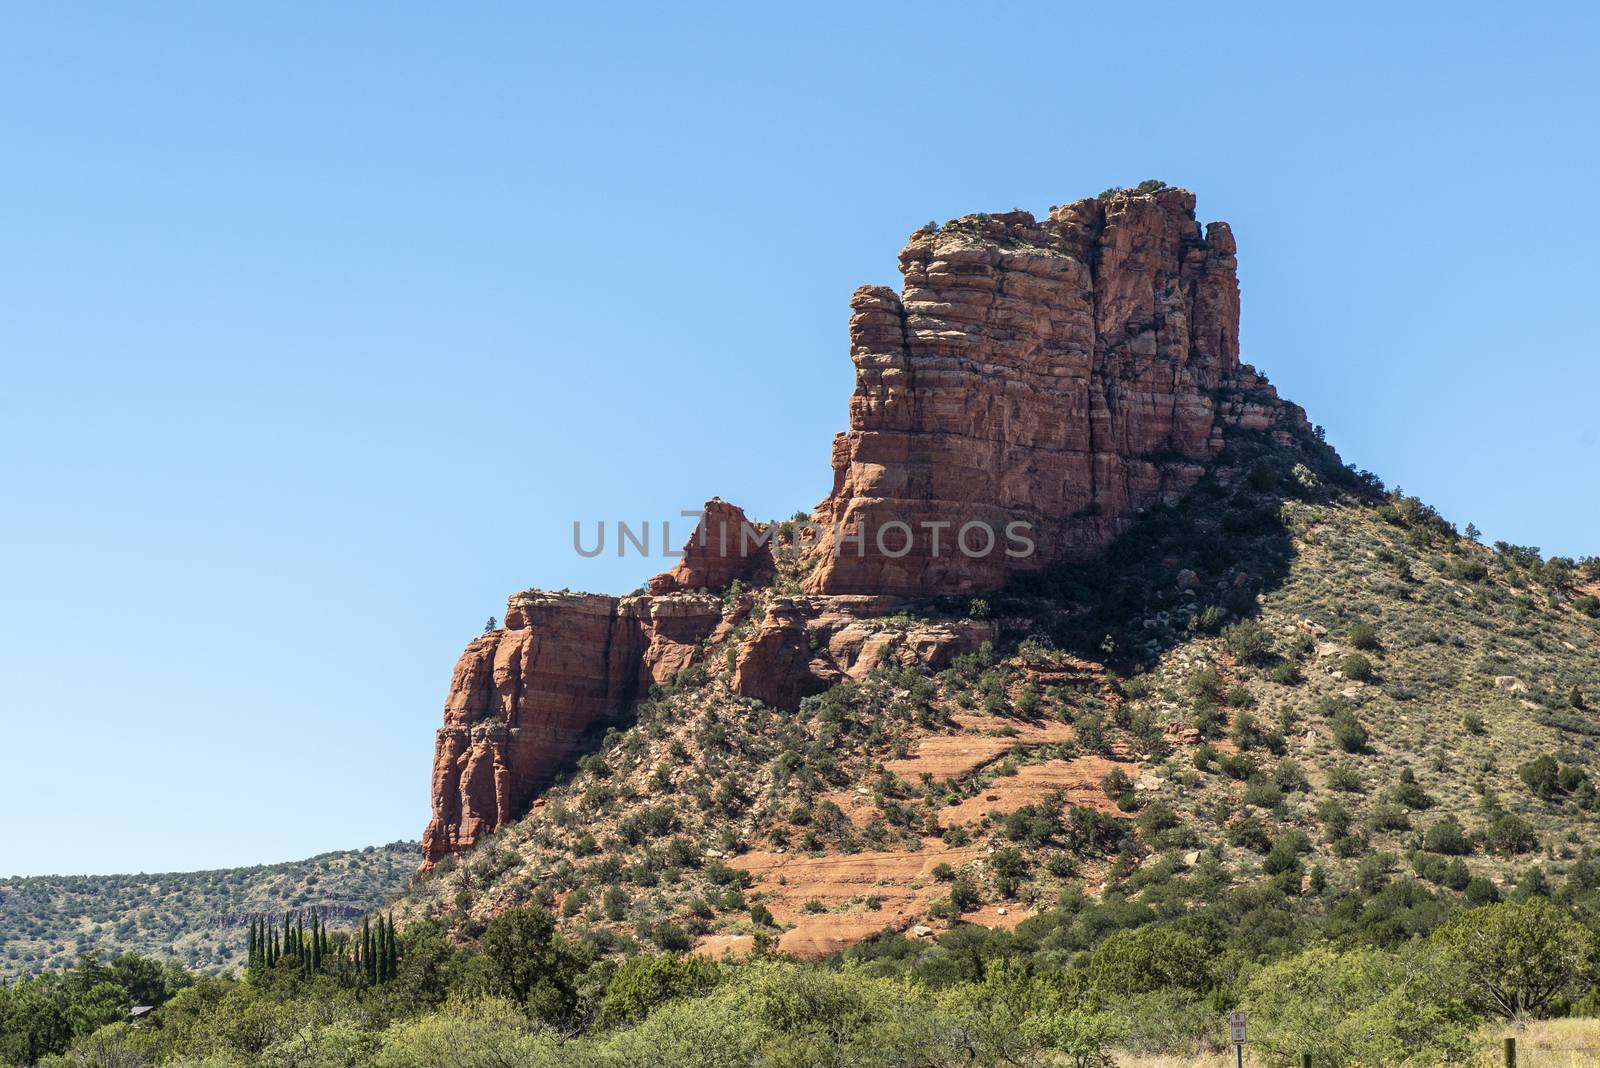 View from Red Rock Scenic Byway in Sedona, Arizona